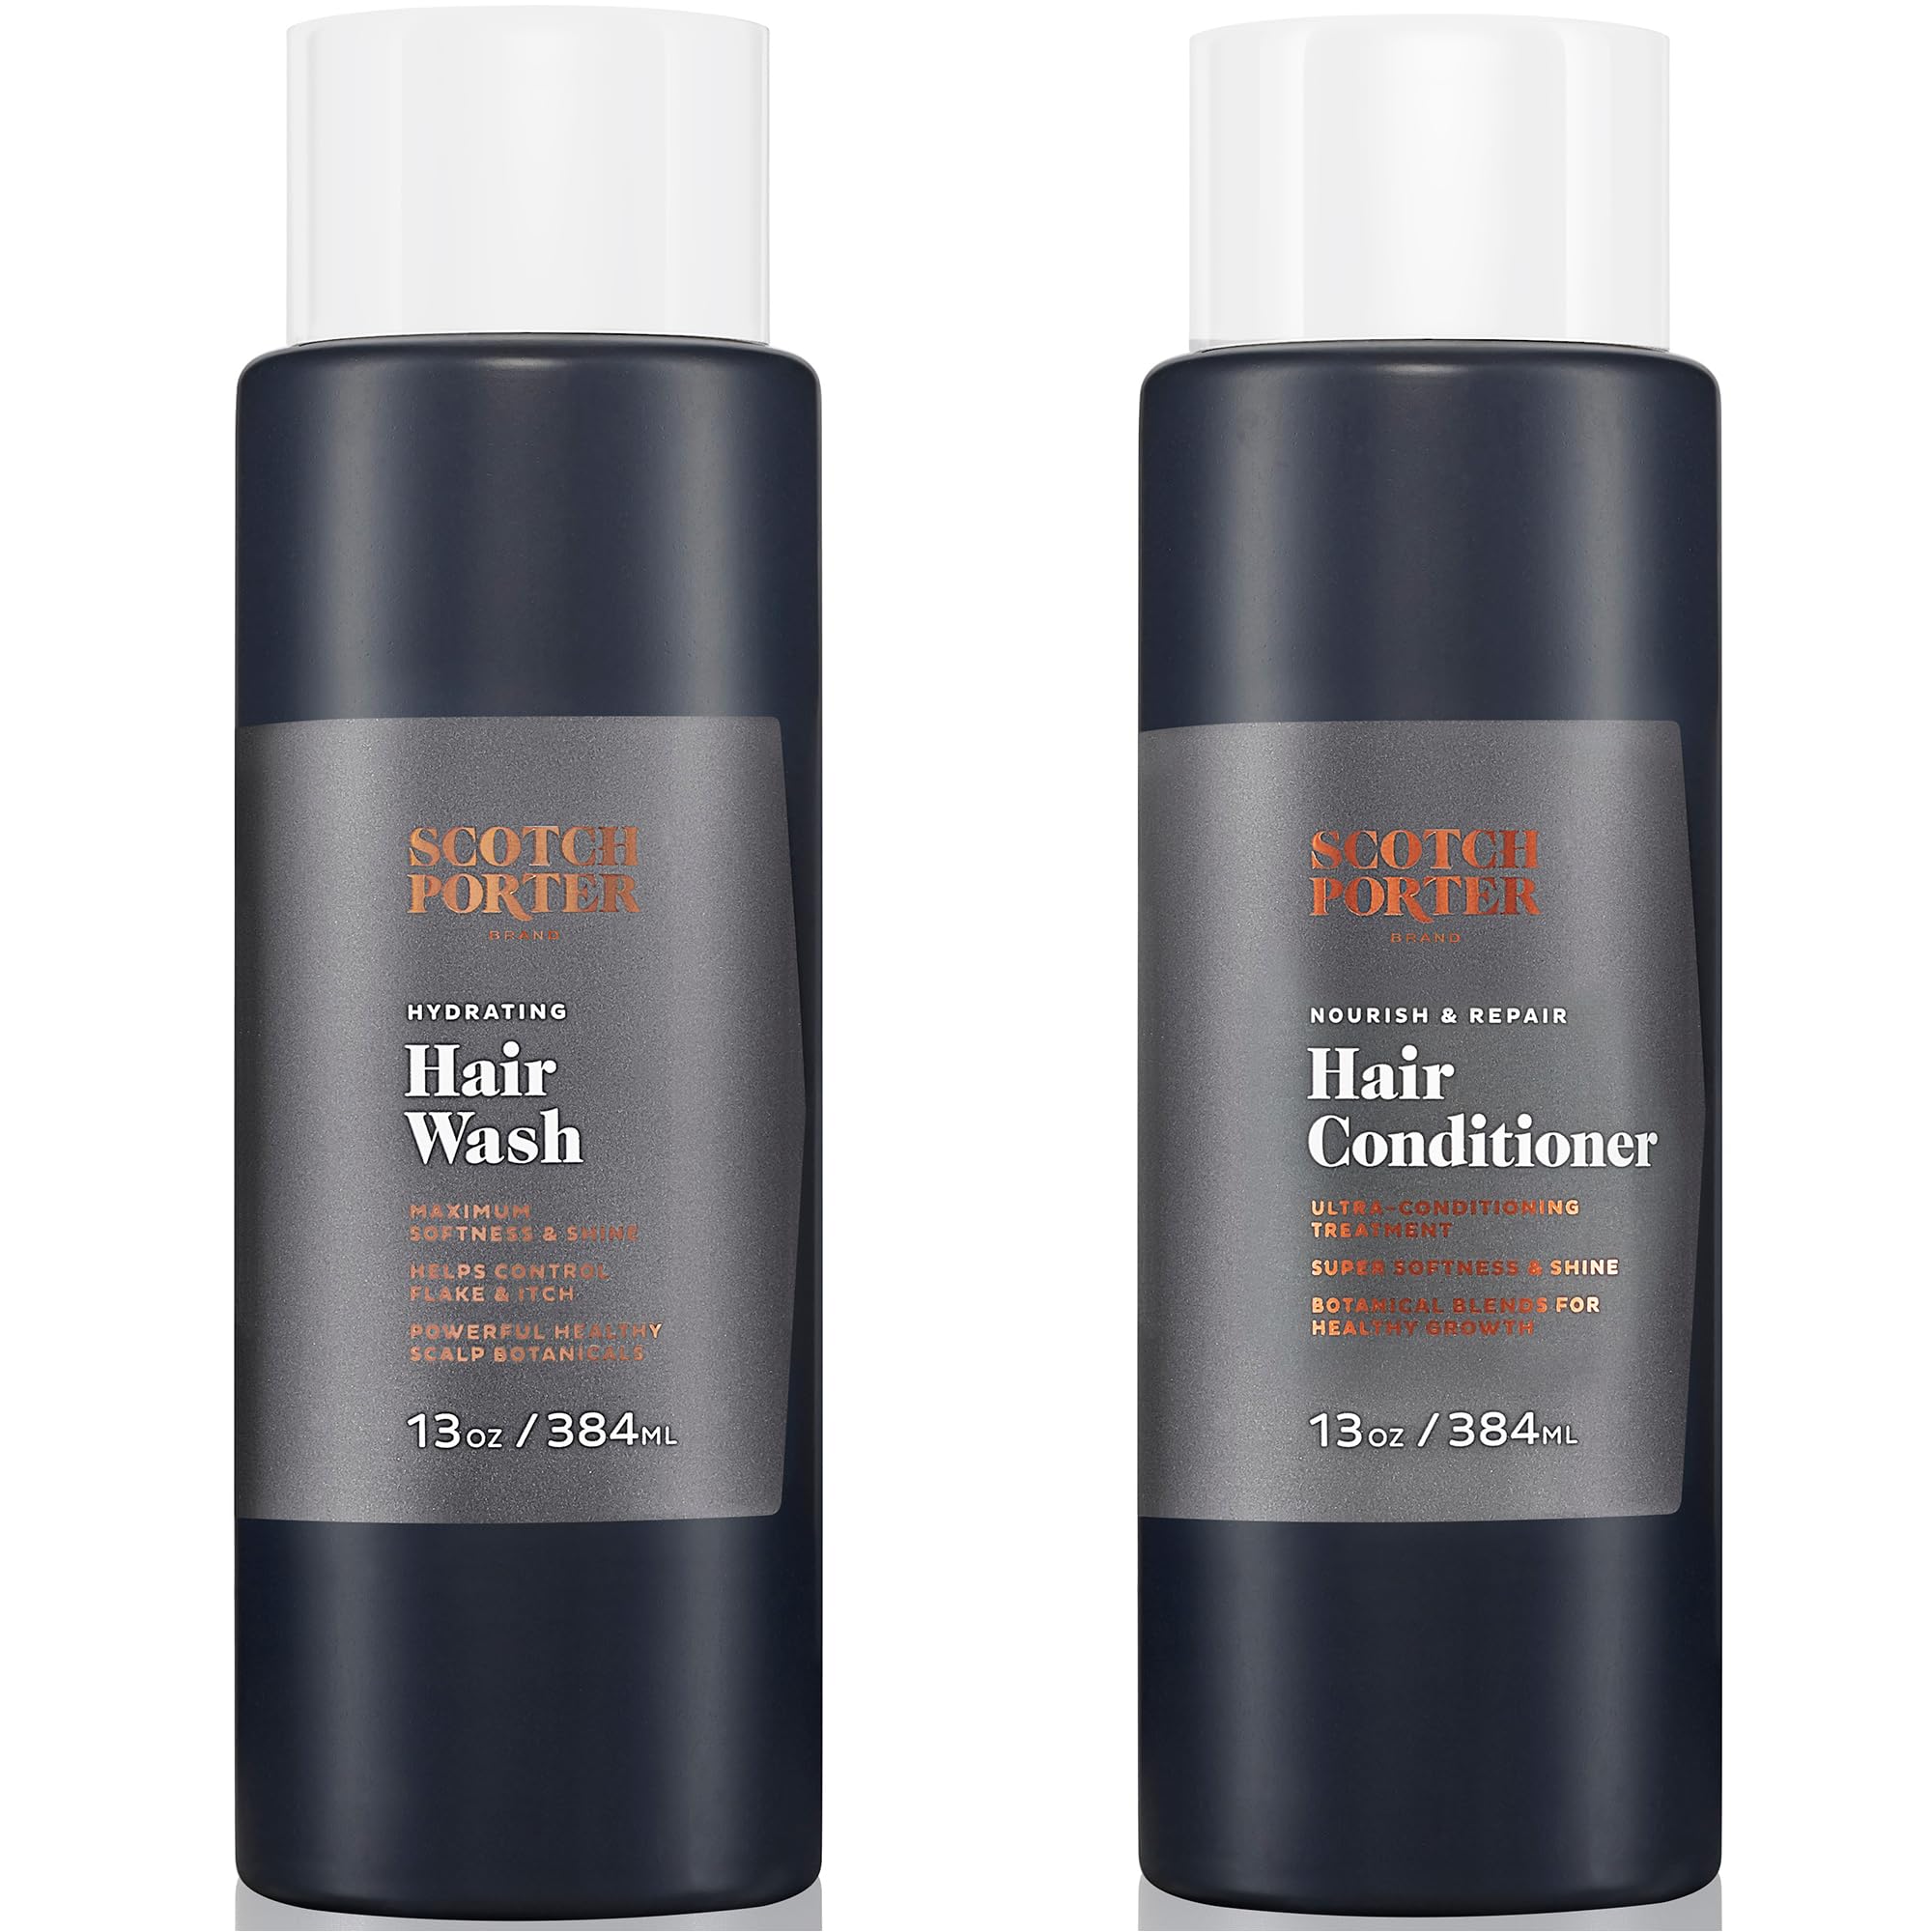 Scotch Porter Nourish & Repair Hair Conditioner and Hydrating Hair Wash | Formulated with Non-Toxic Ingredients, Free of Parabens, Sulfates & Silicones | Vegan | Bottle 13oz, Bottle 13oz